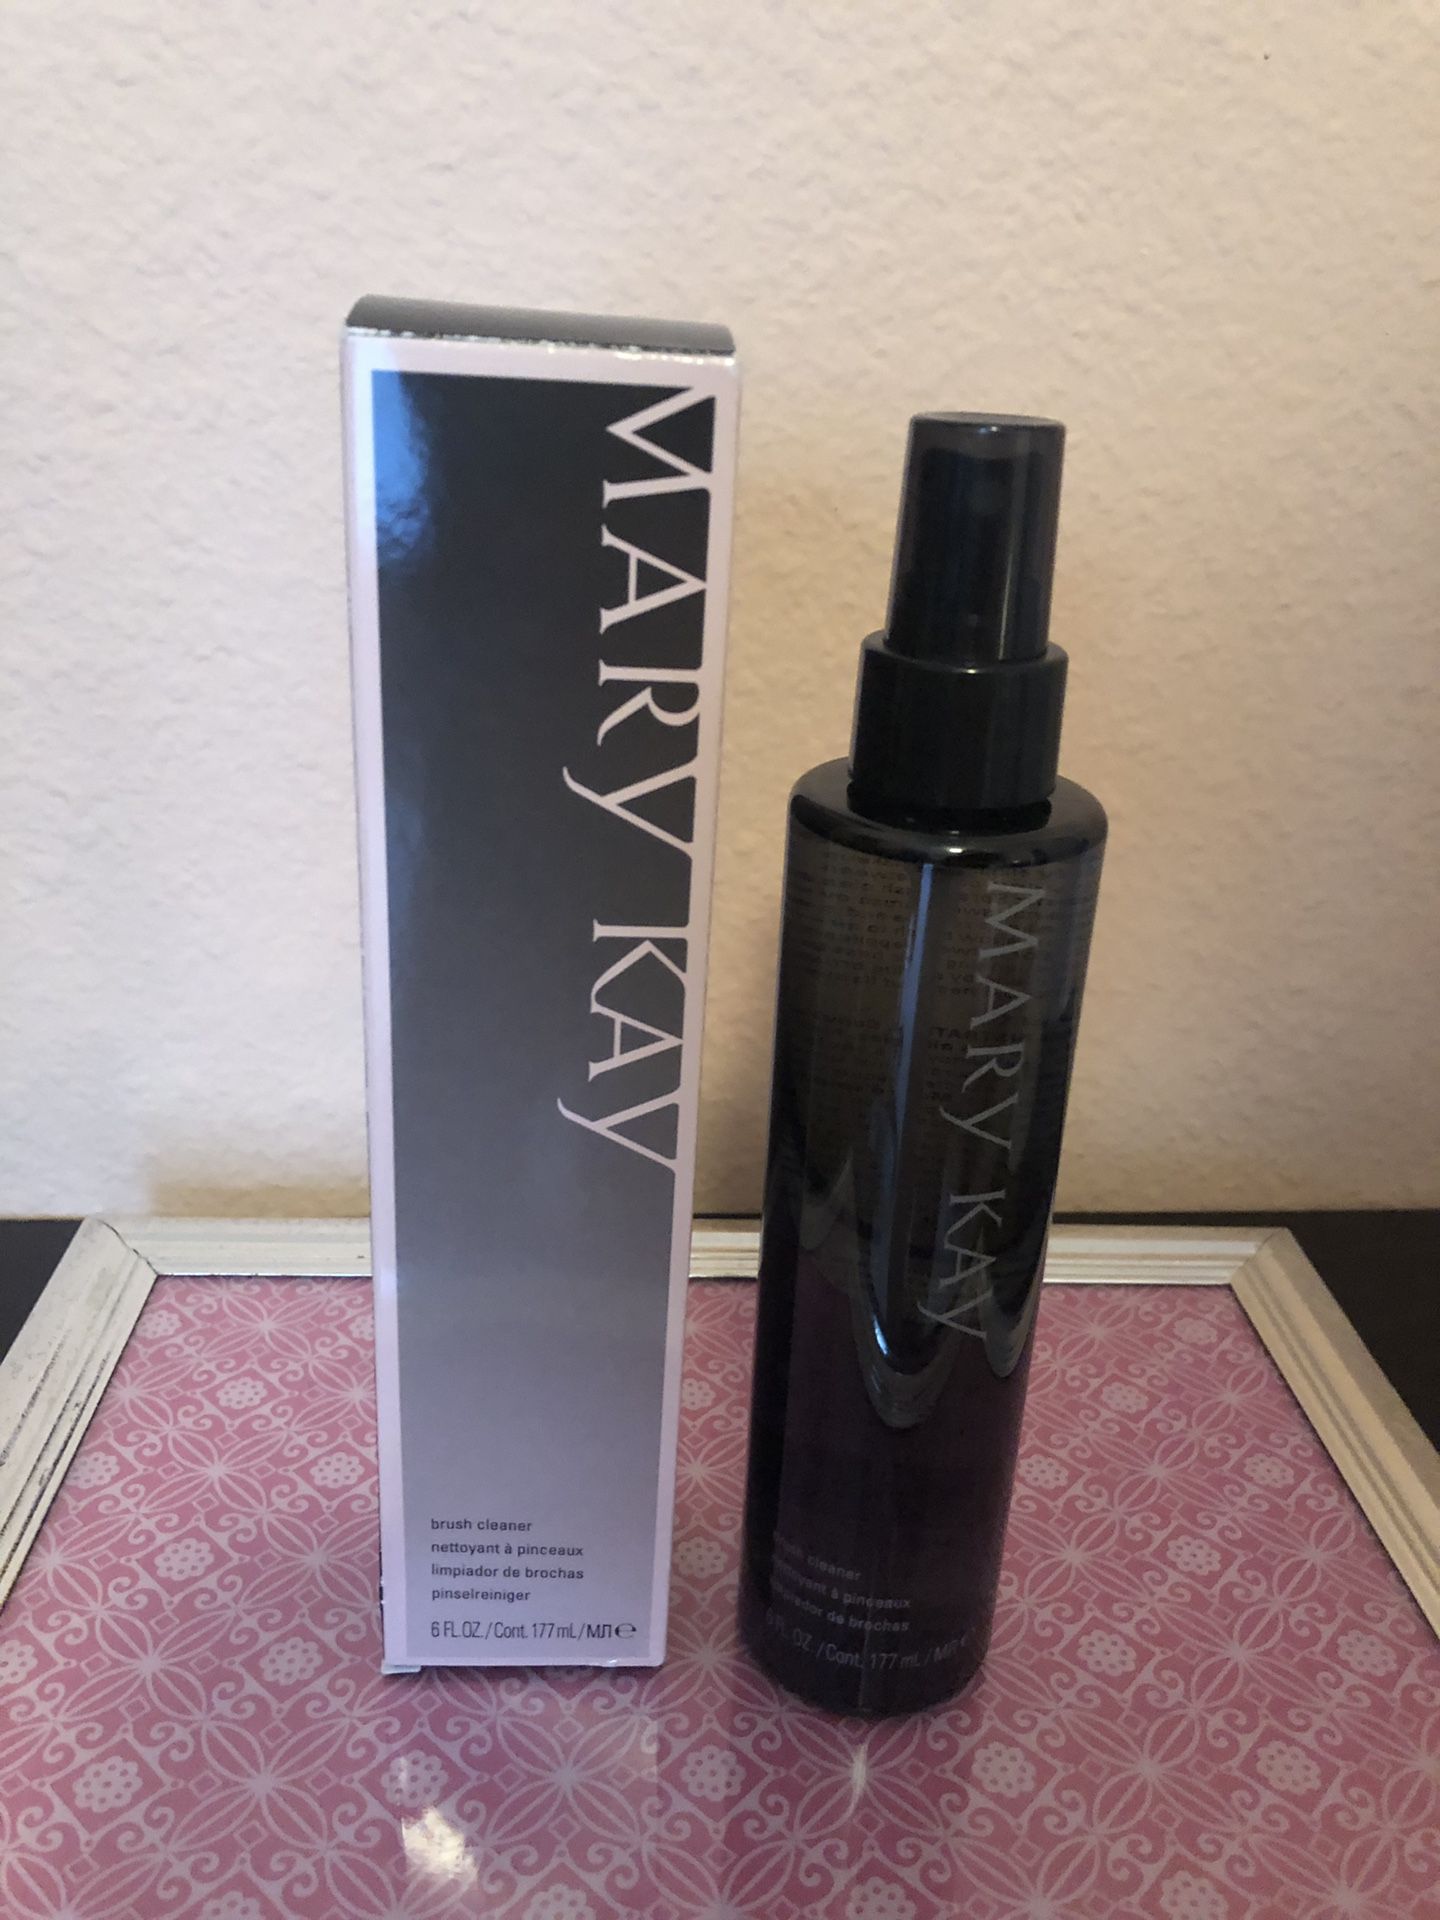 Mary Kay makeup brush cleaner spray at 50% off!